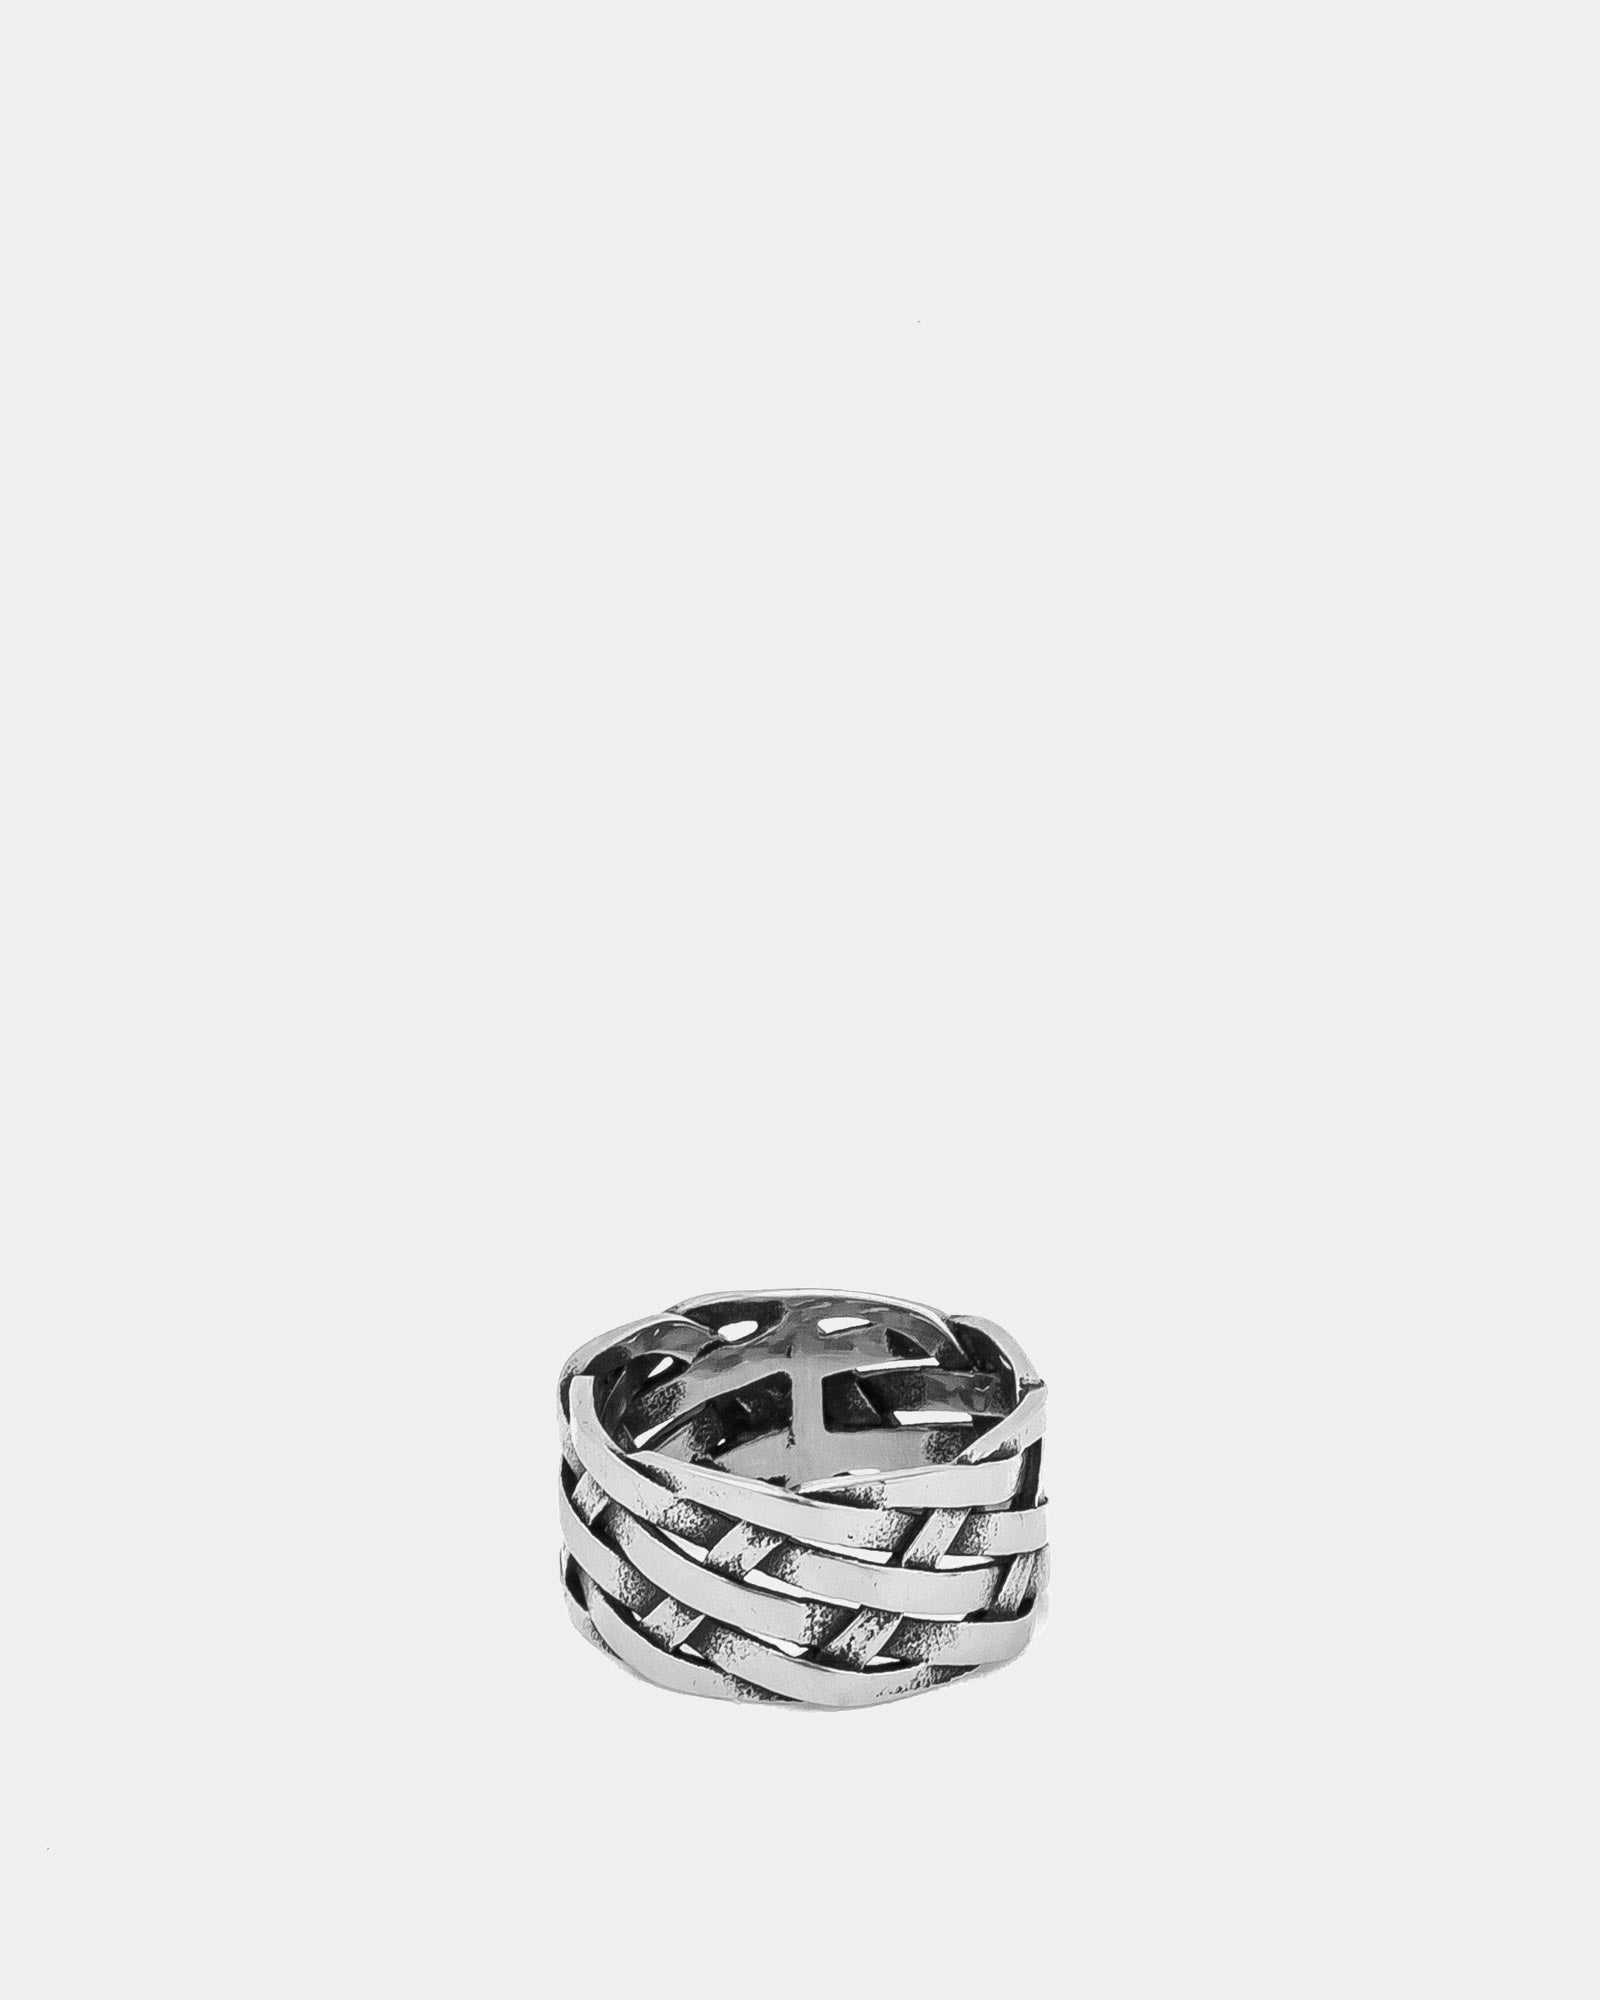 Woven Ring - Stainless Steel Ring with handmade braided woven details - Online Unissex Jewelry - Dicci